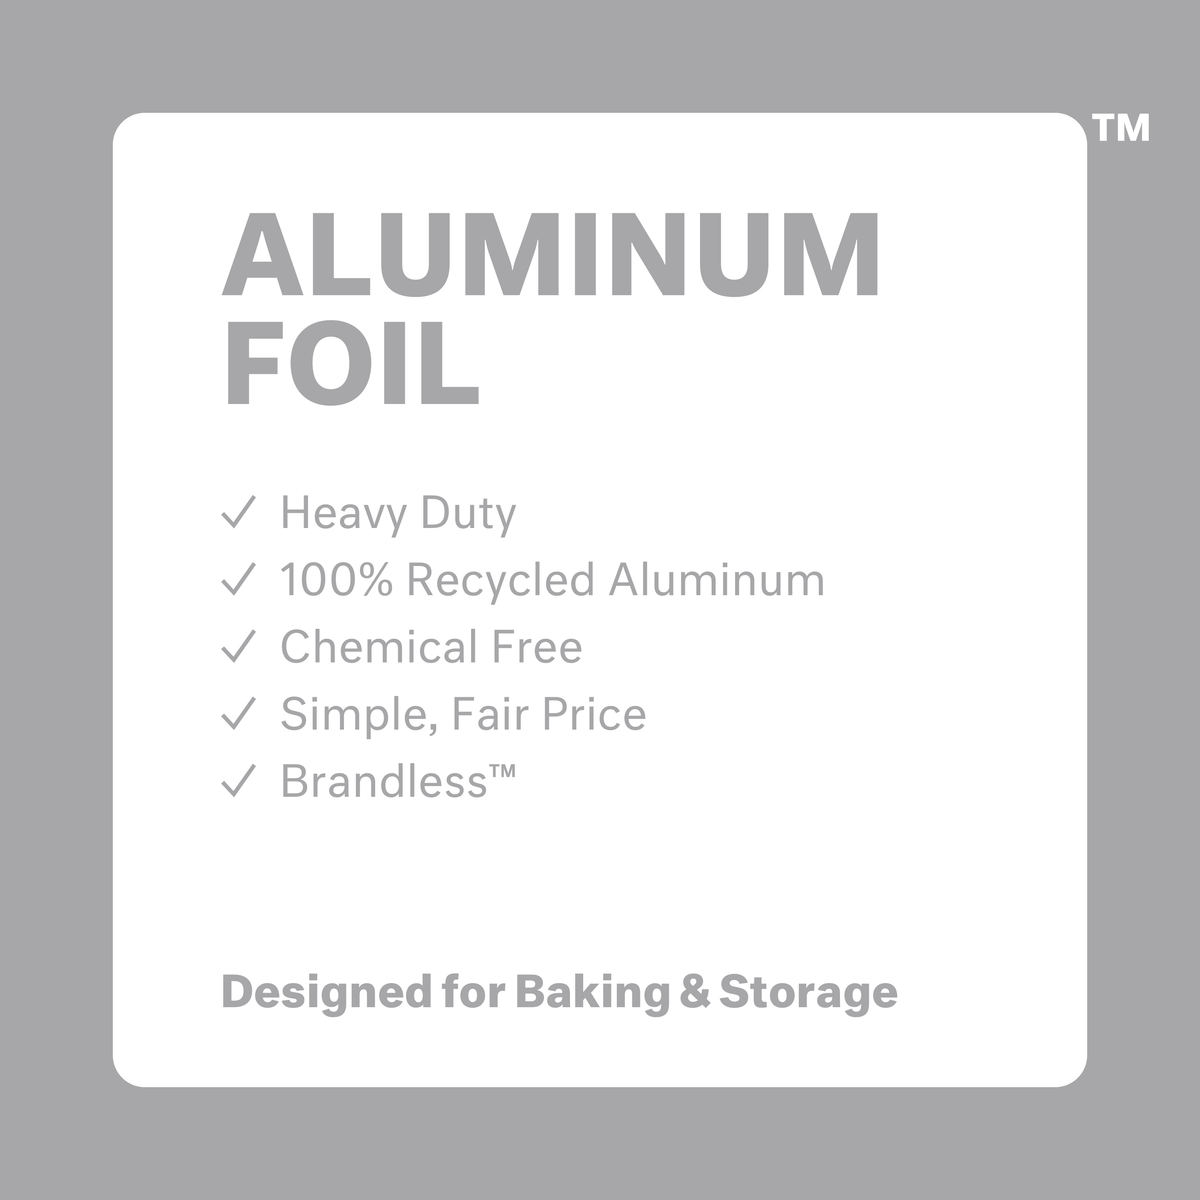 Aluminum foil: heavy duty, 100% recycled aluminum, chemical free, simple, fair price, brandless.  Designed for baking and storage.